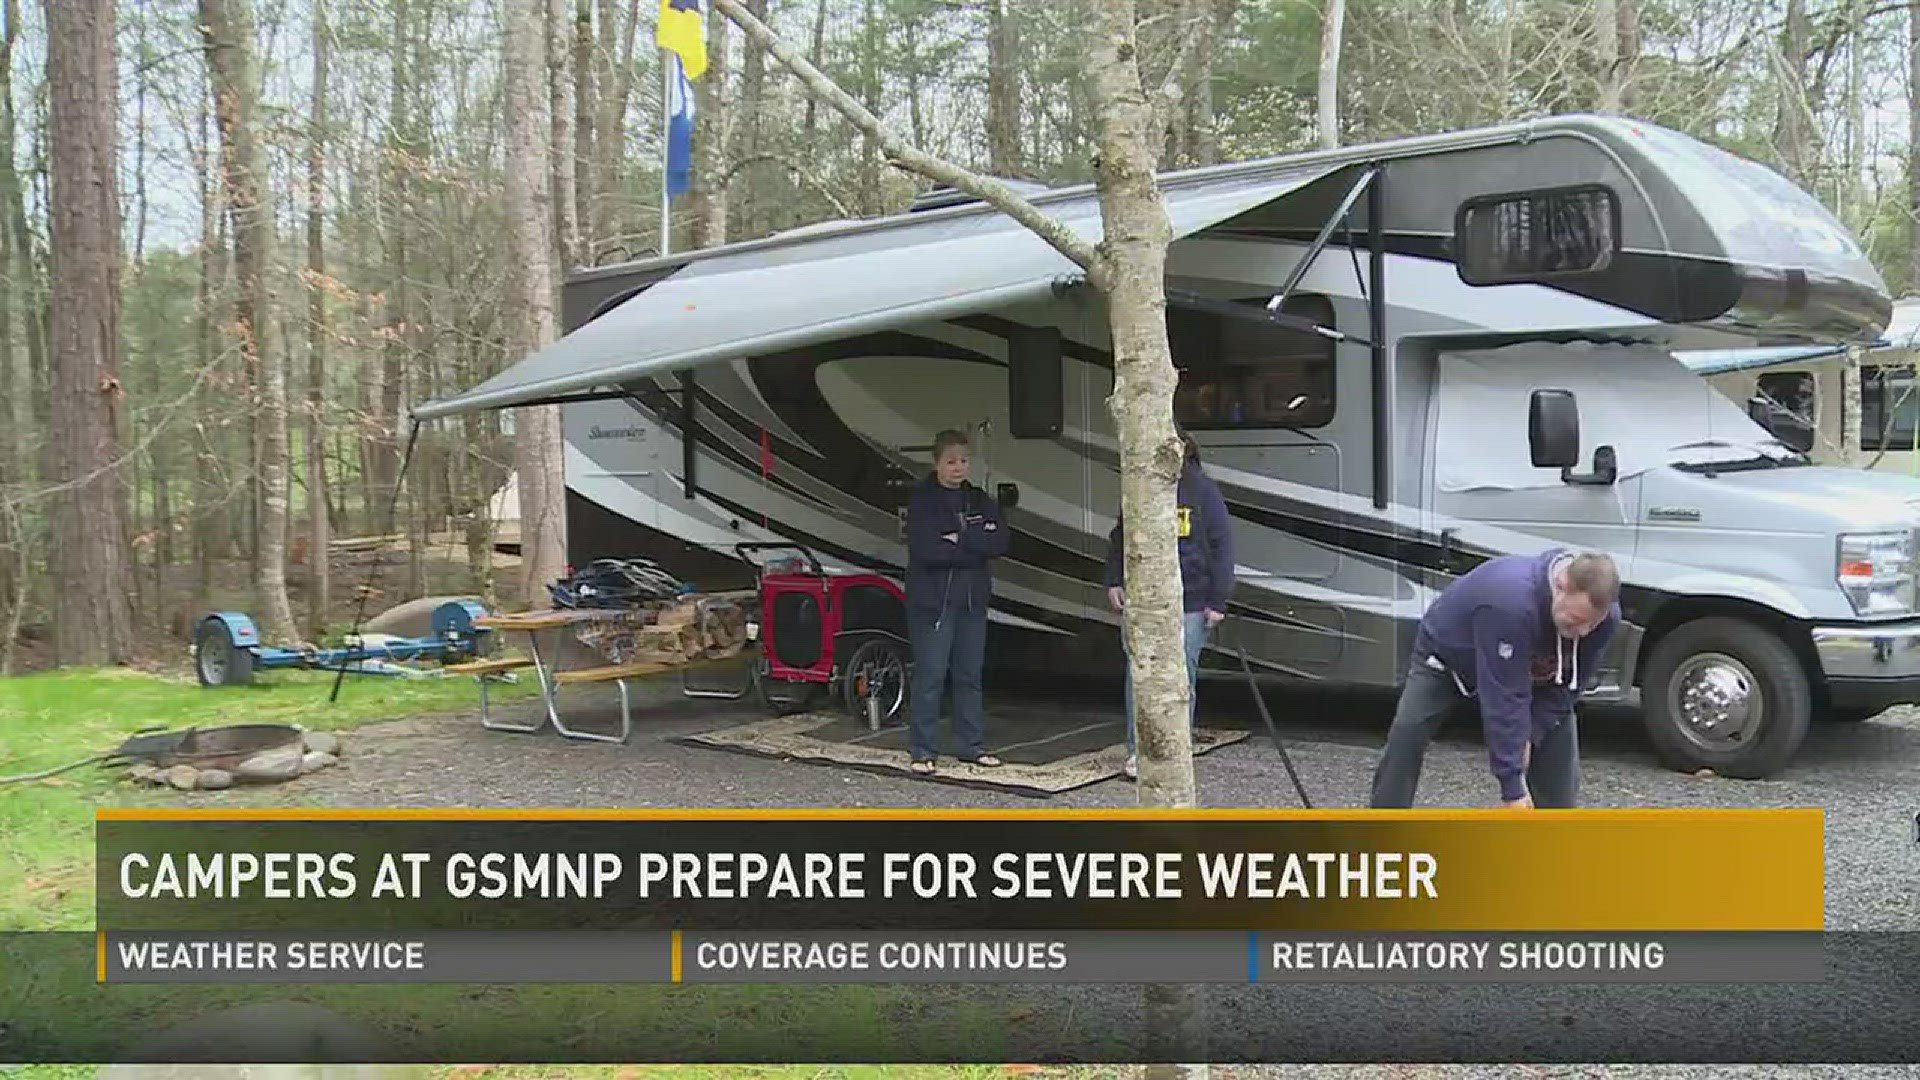 April 5, 2017: Travelers and campers in the Great Smoky Mountains National Park are preparing their campsites as severe weather moves into the area.